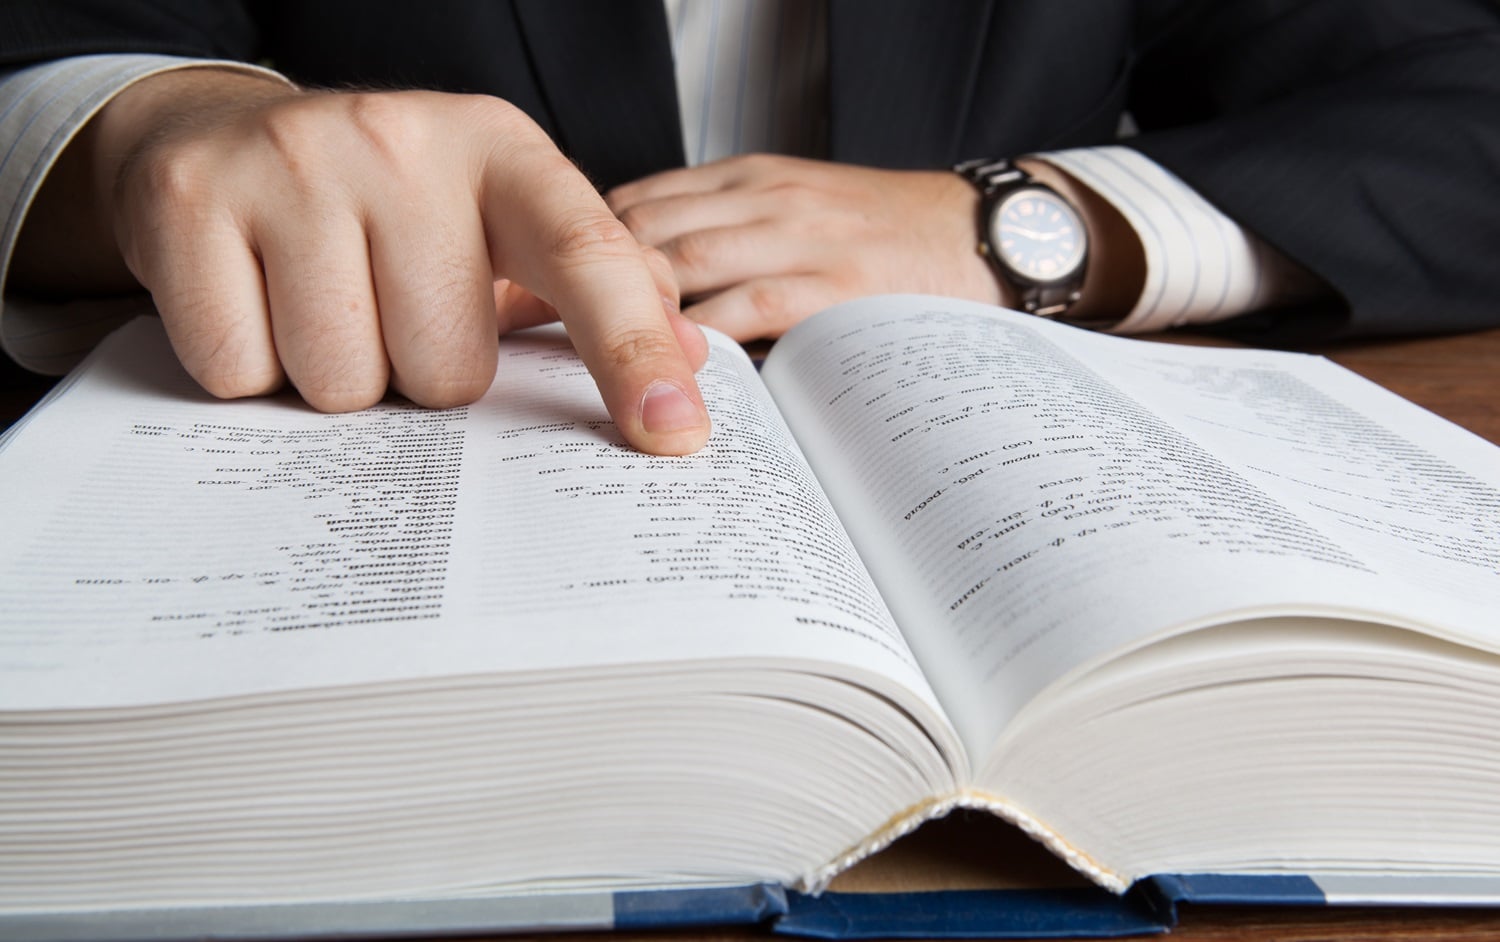 A man in a suit searches for a term in a large paper glossary.